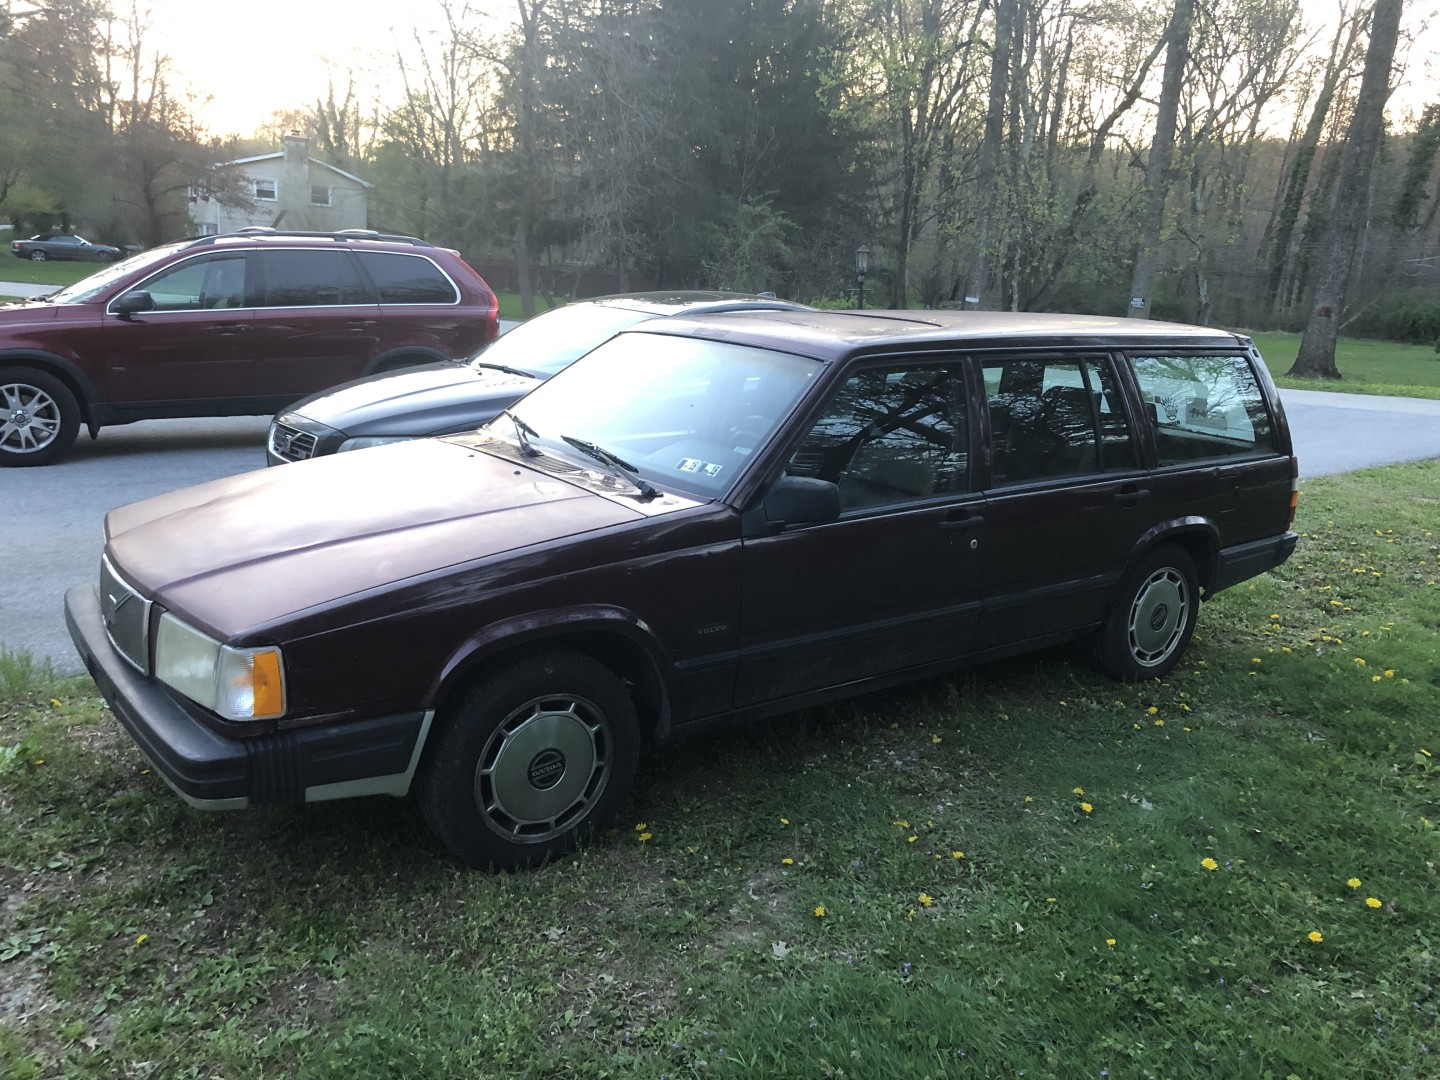 Starting my dream project using a Volvo wagon